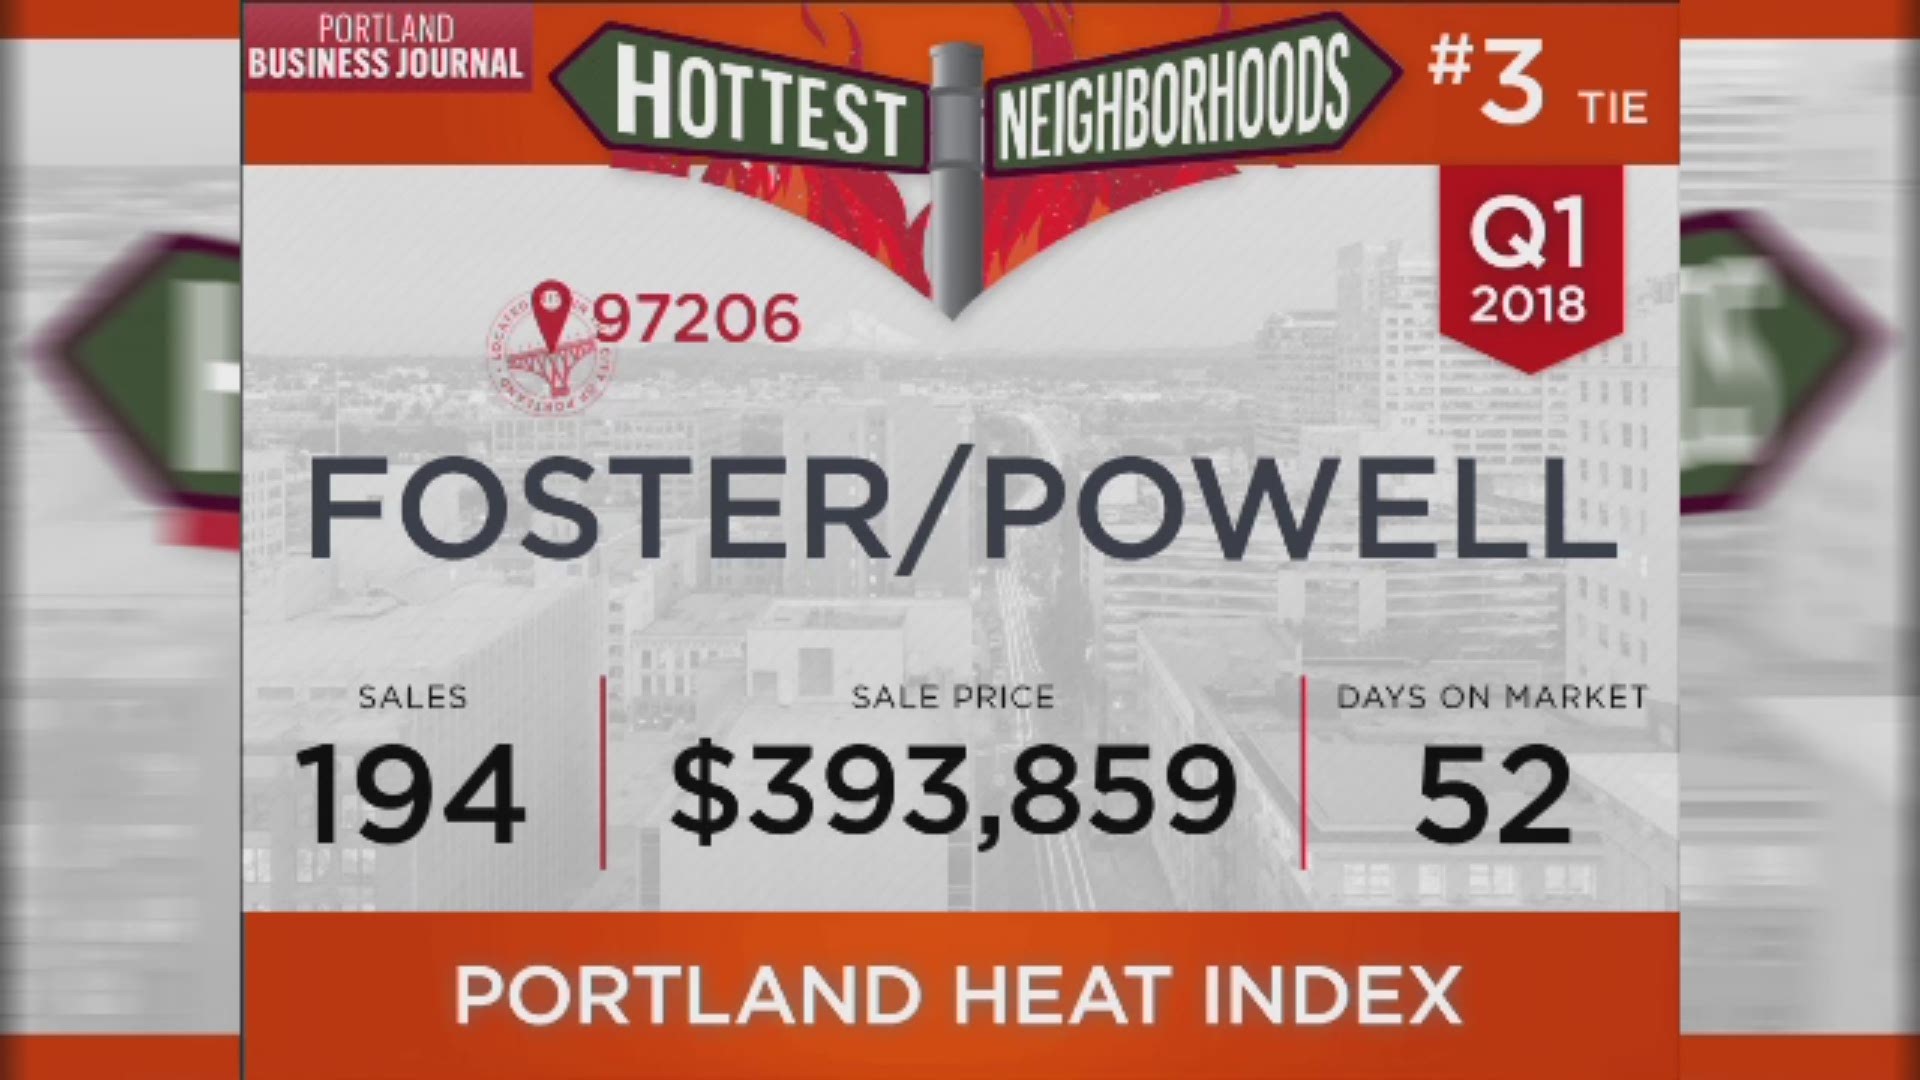 Here's a quick look at Portland's hottest neighborhoods for the first quarter of 2018